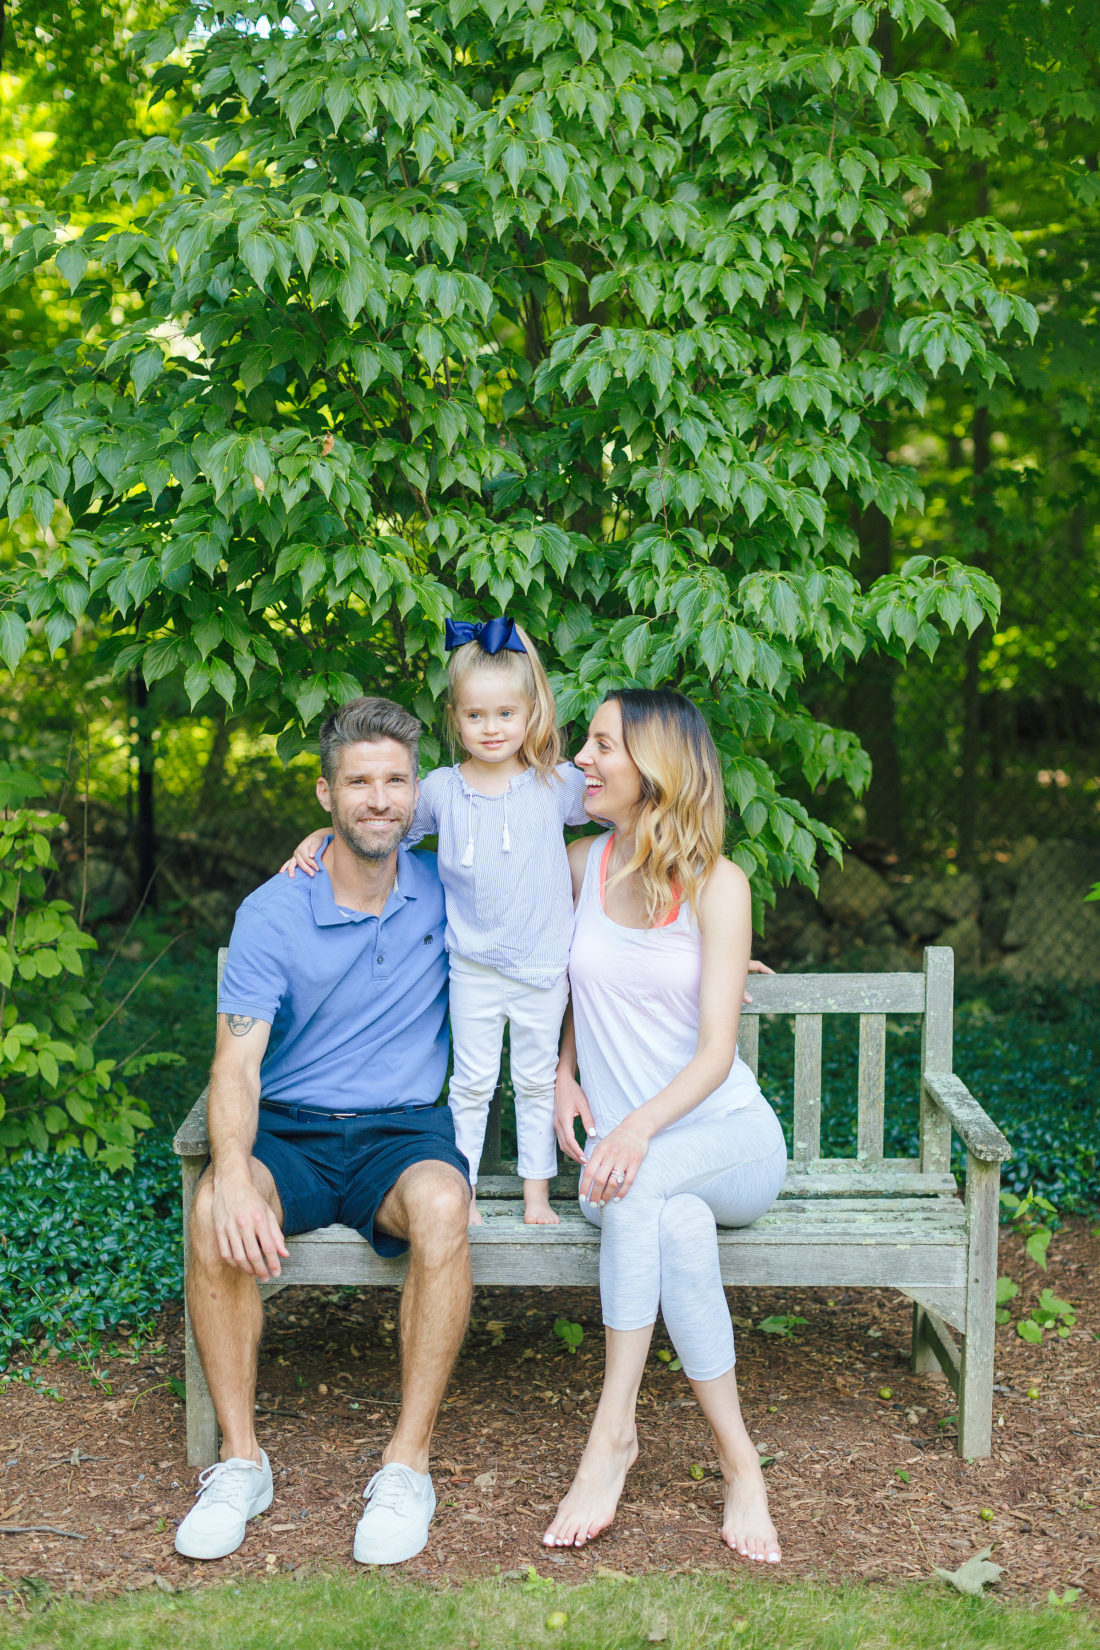 Eva Amurri Martino and Kyle Martino sit with four year old daughter marlowe on a bench surrounded by greenery in the yard of their Connecticut home